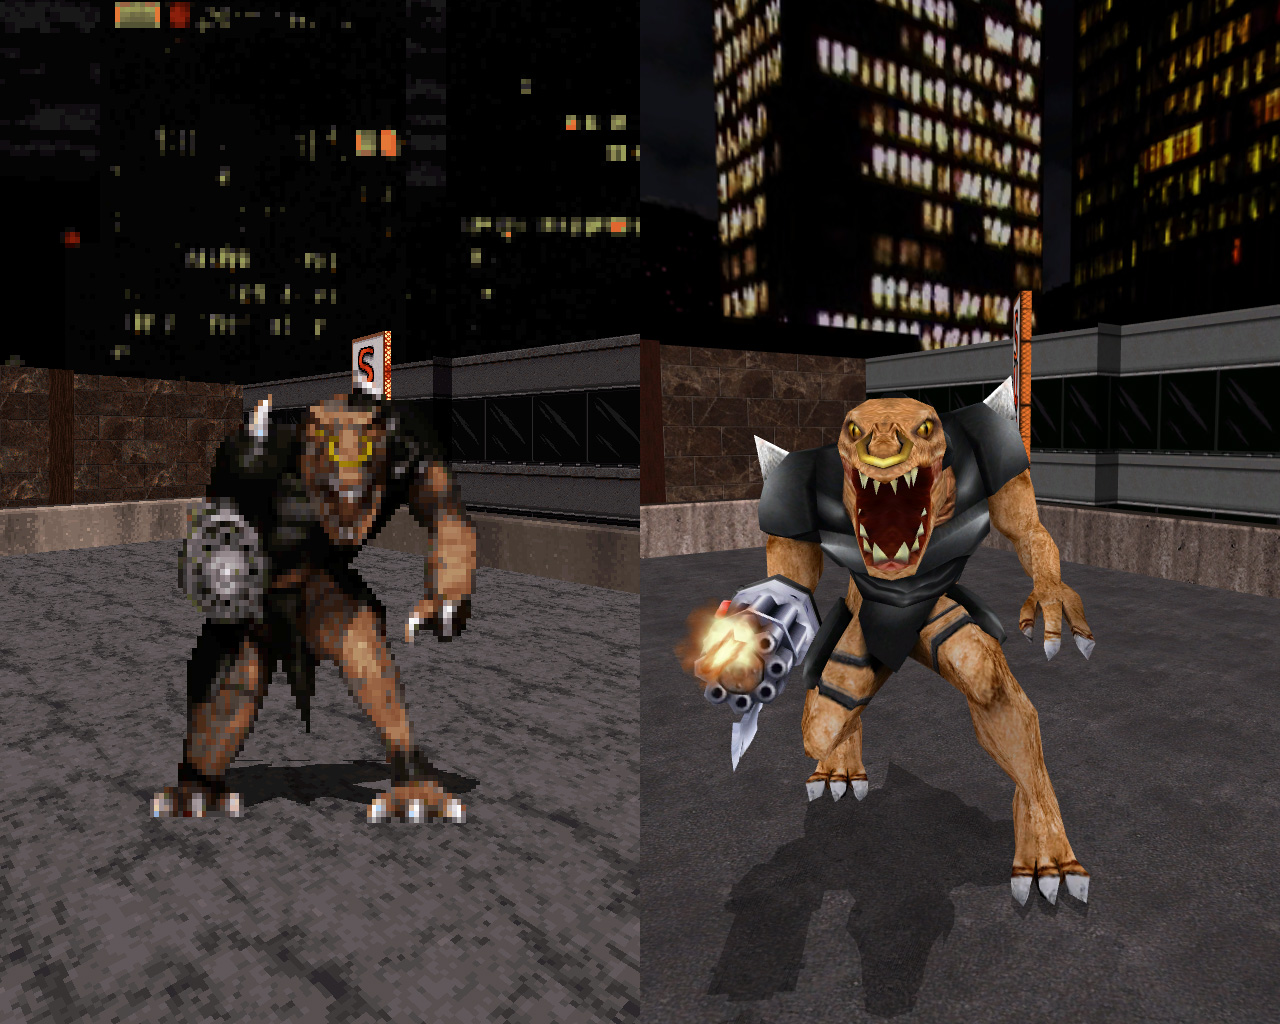 quake 2 hd textures and models pack